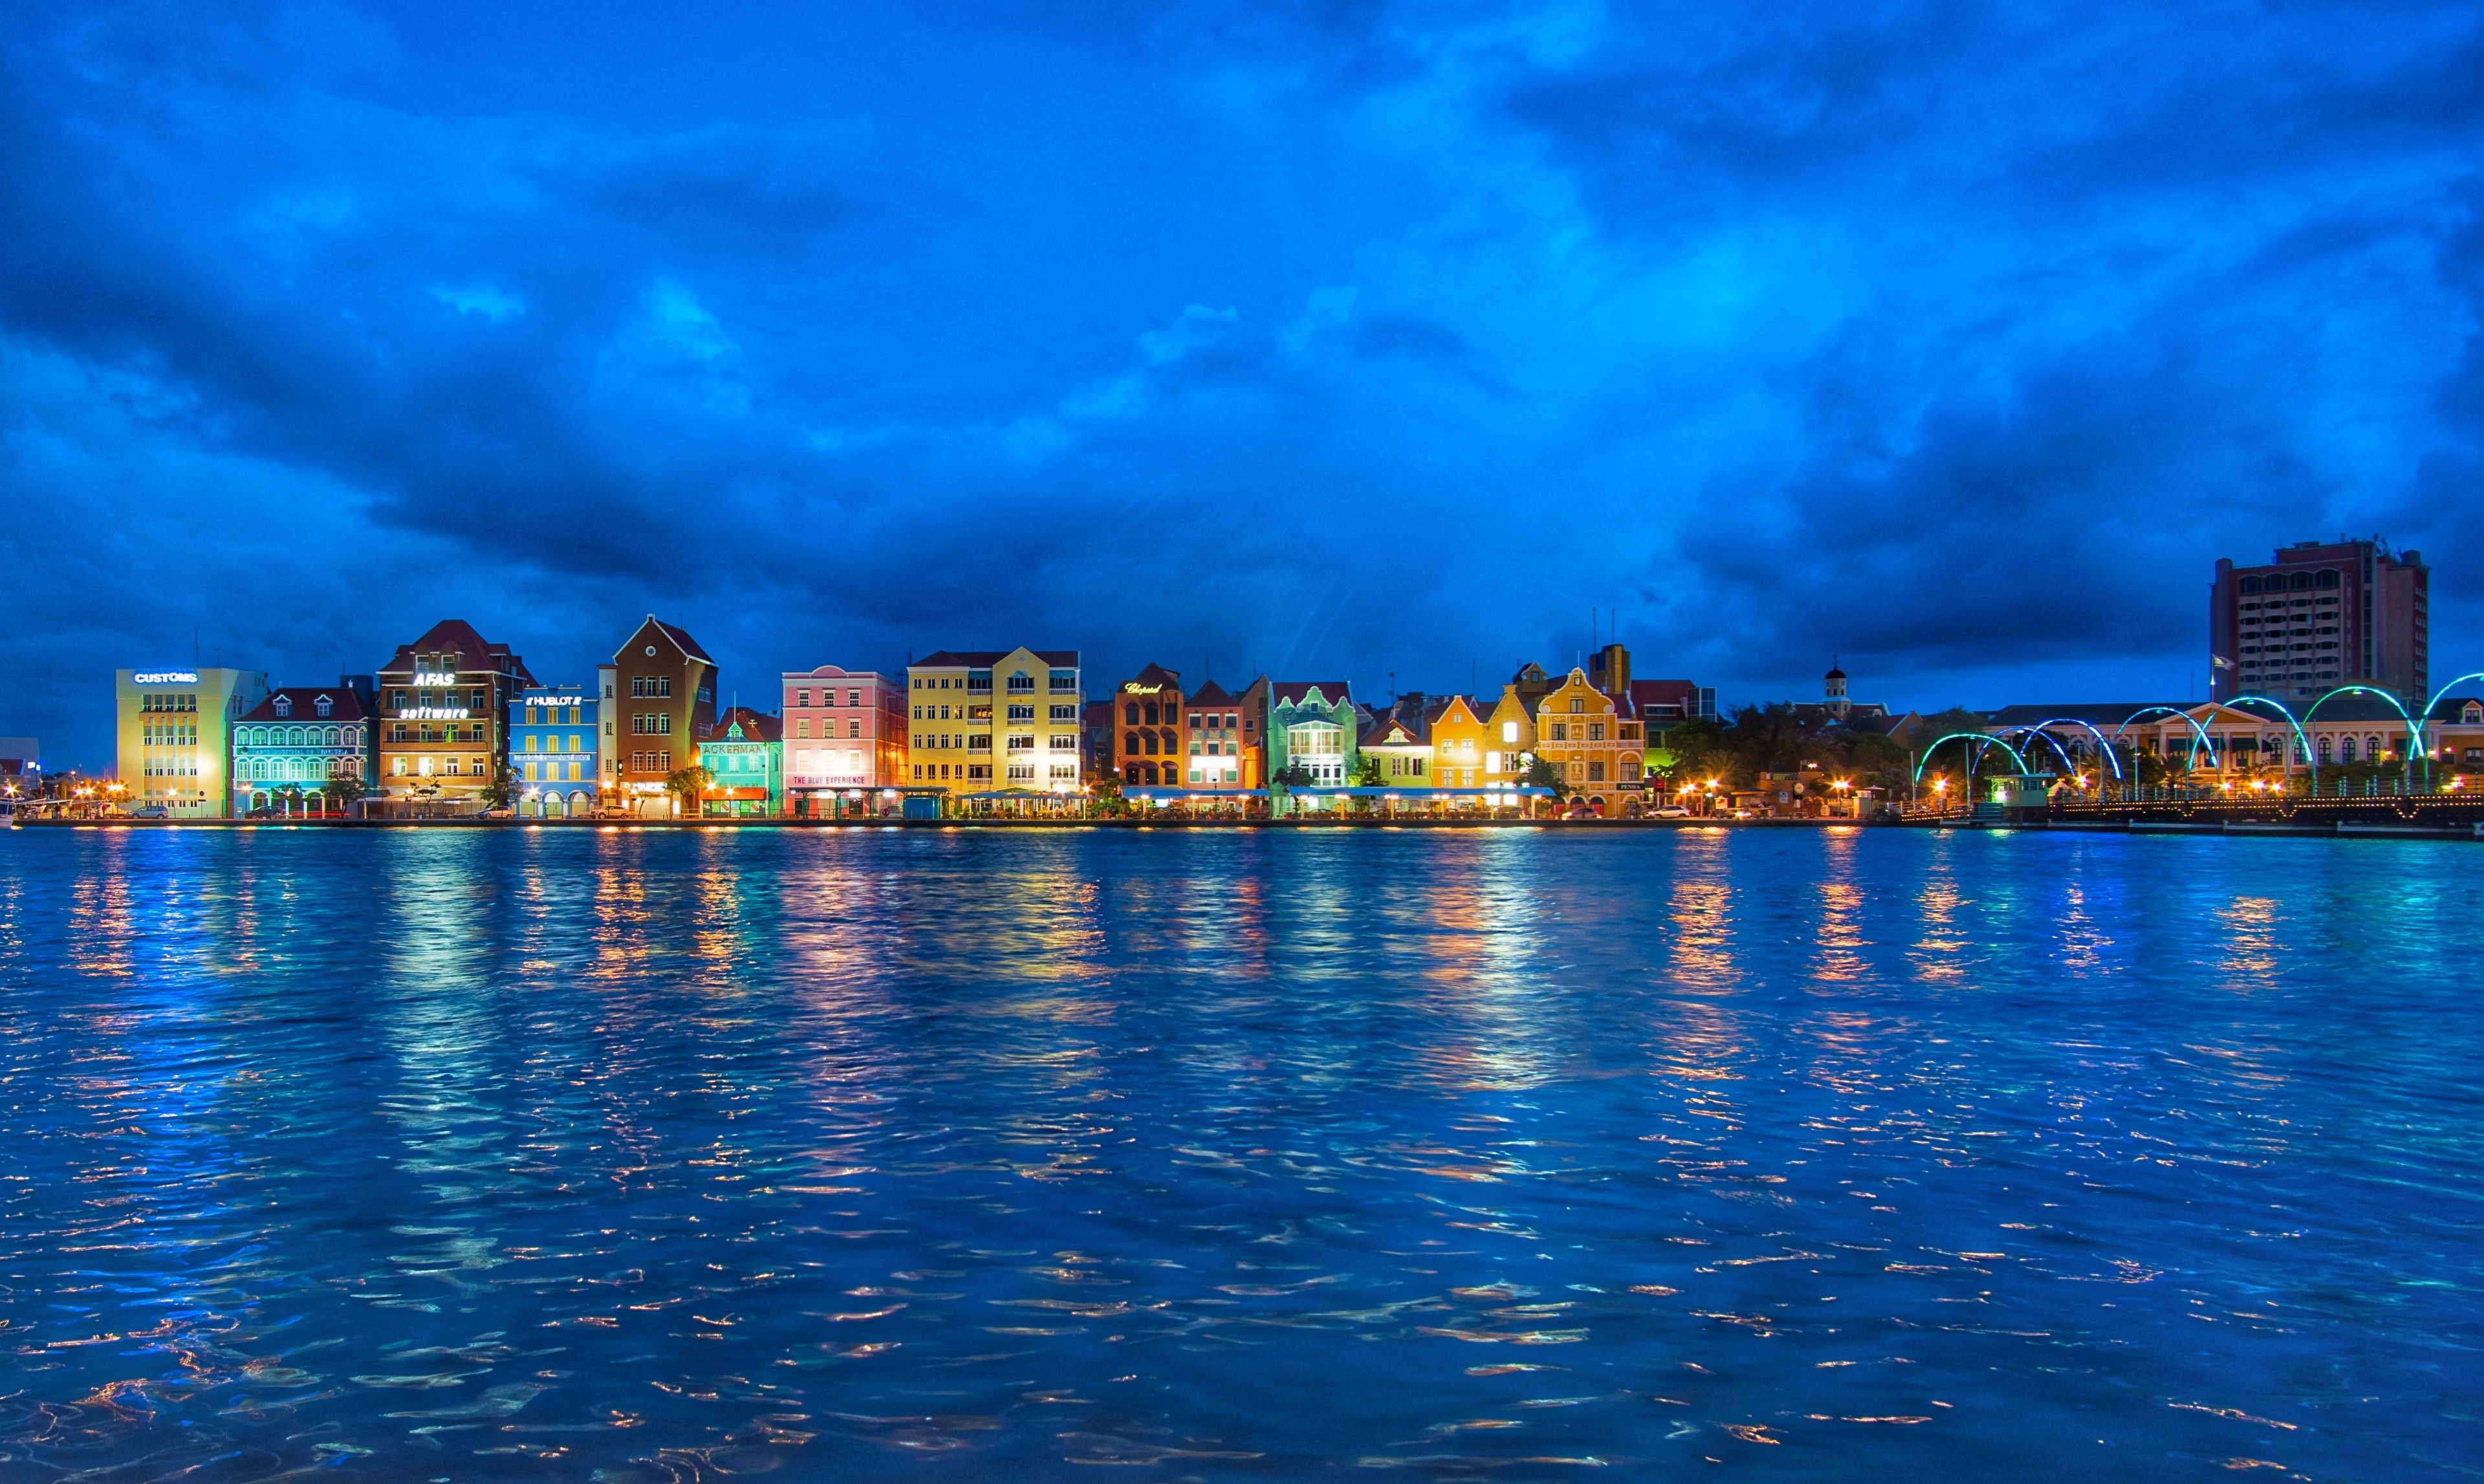 The harbor view in the port area of Willemstad at night